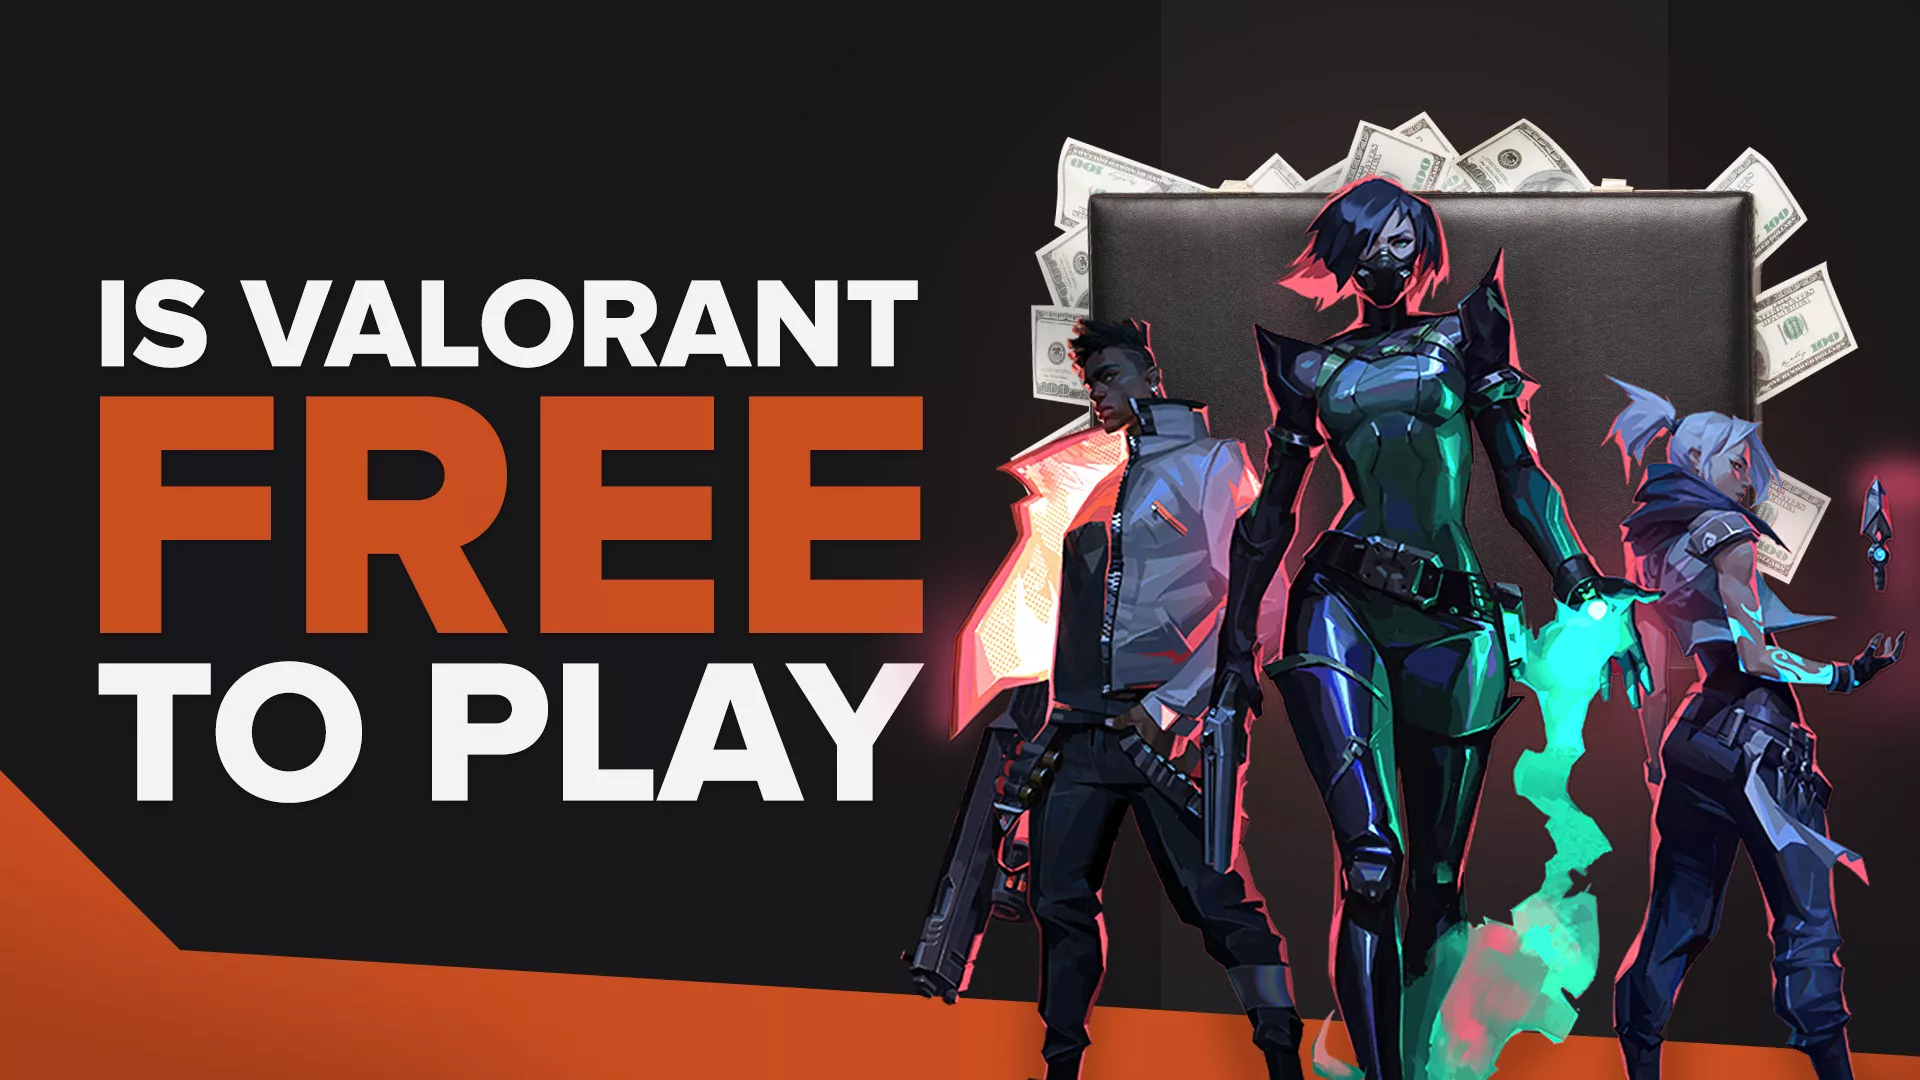 Is Valorant free to play?